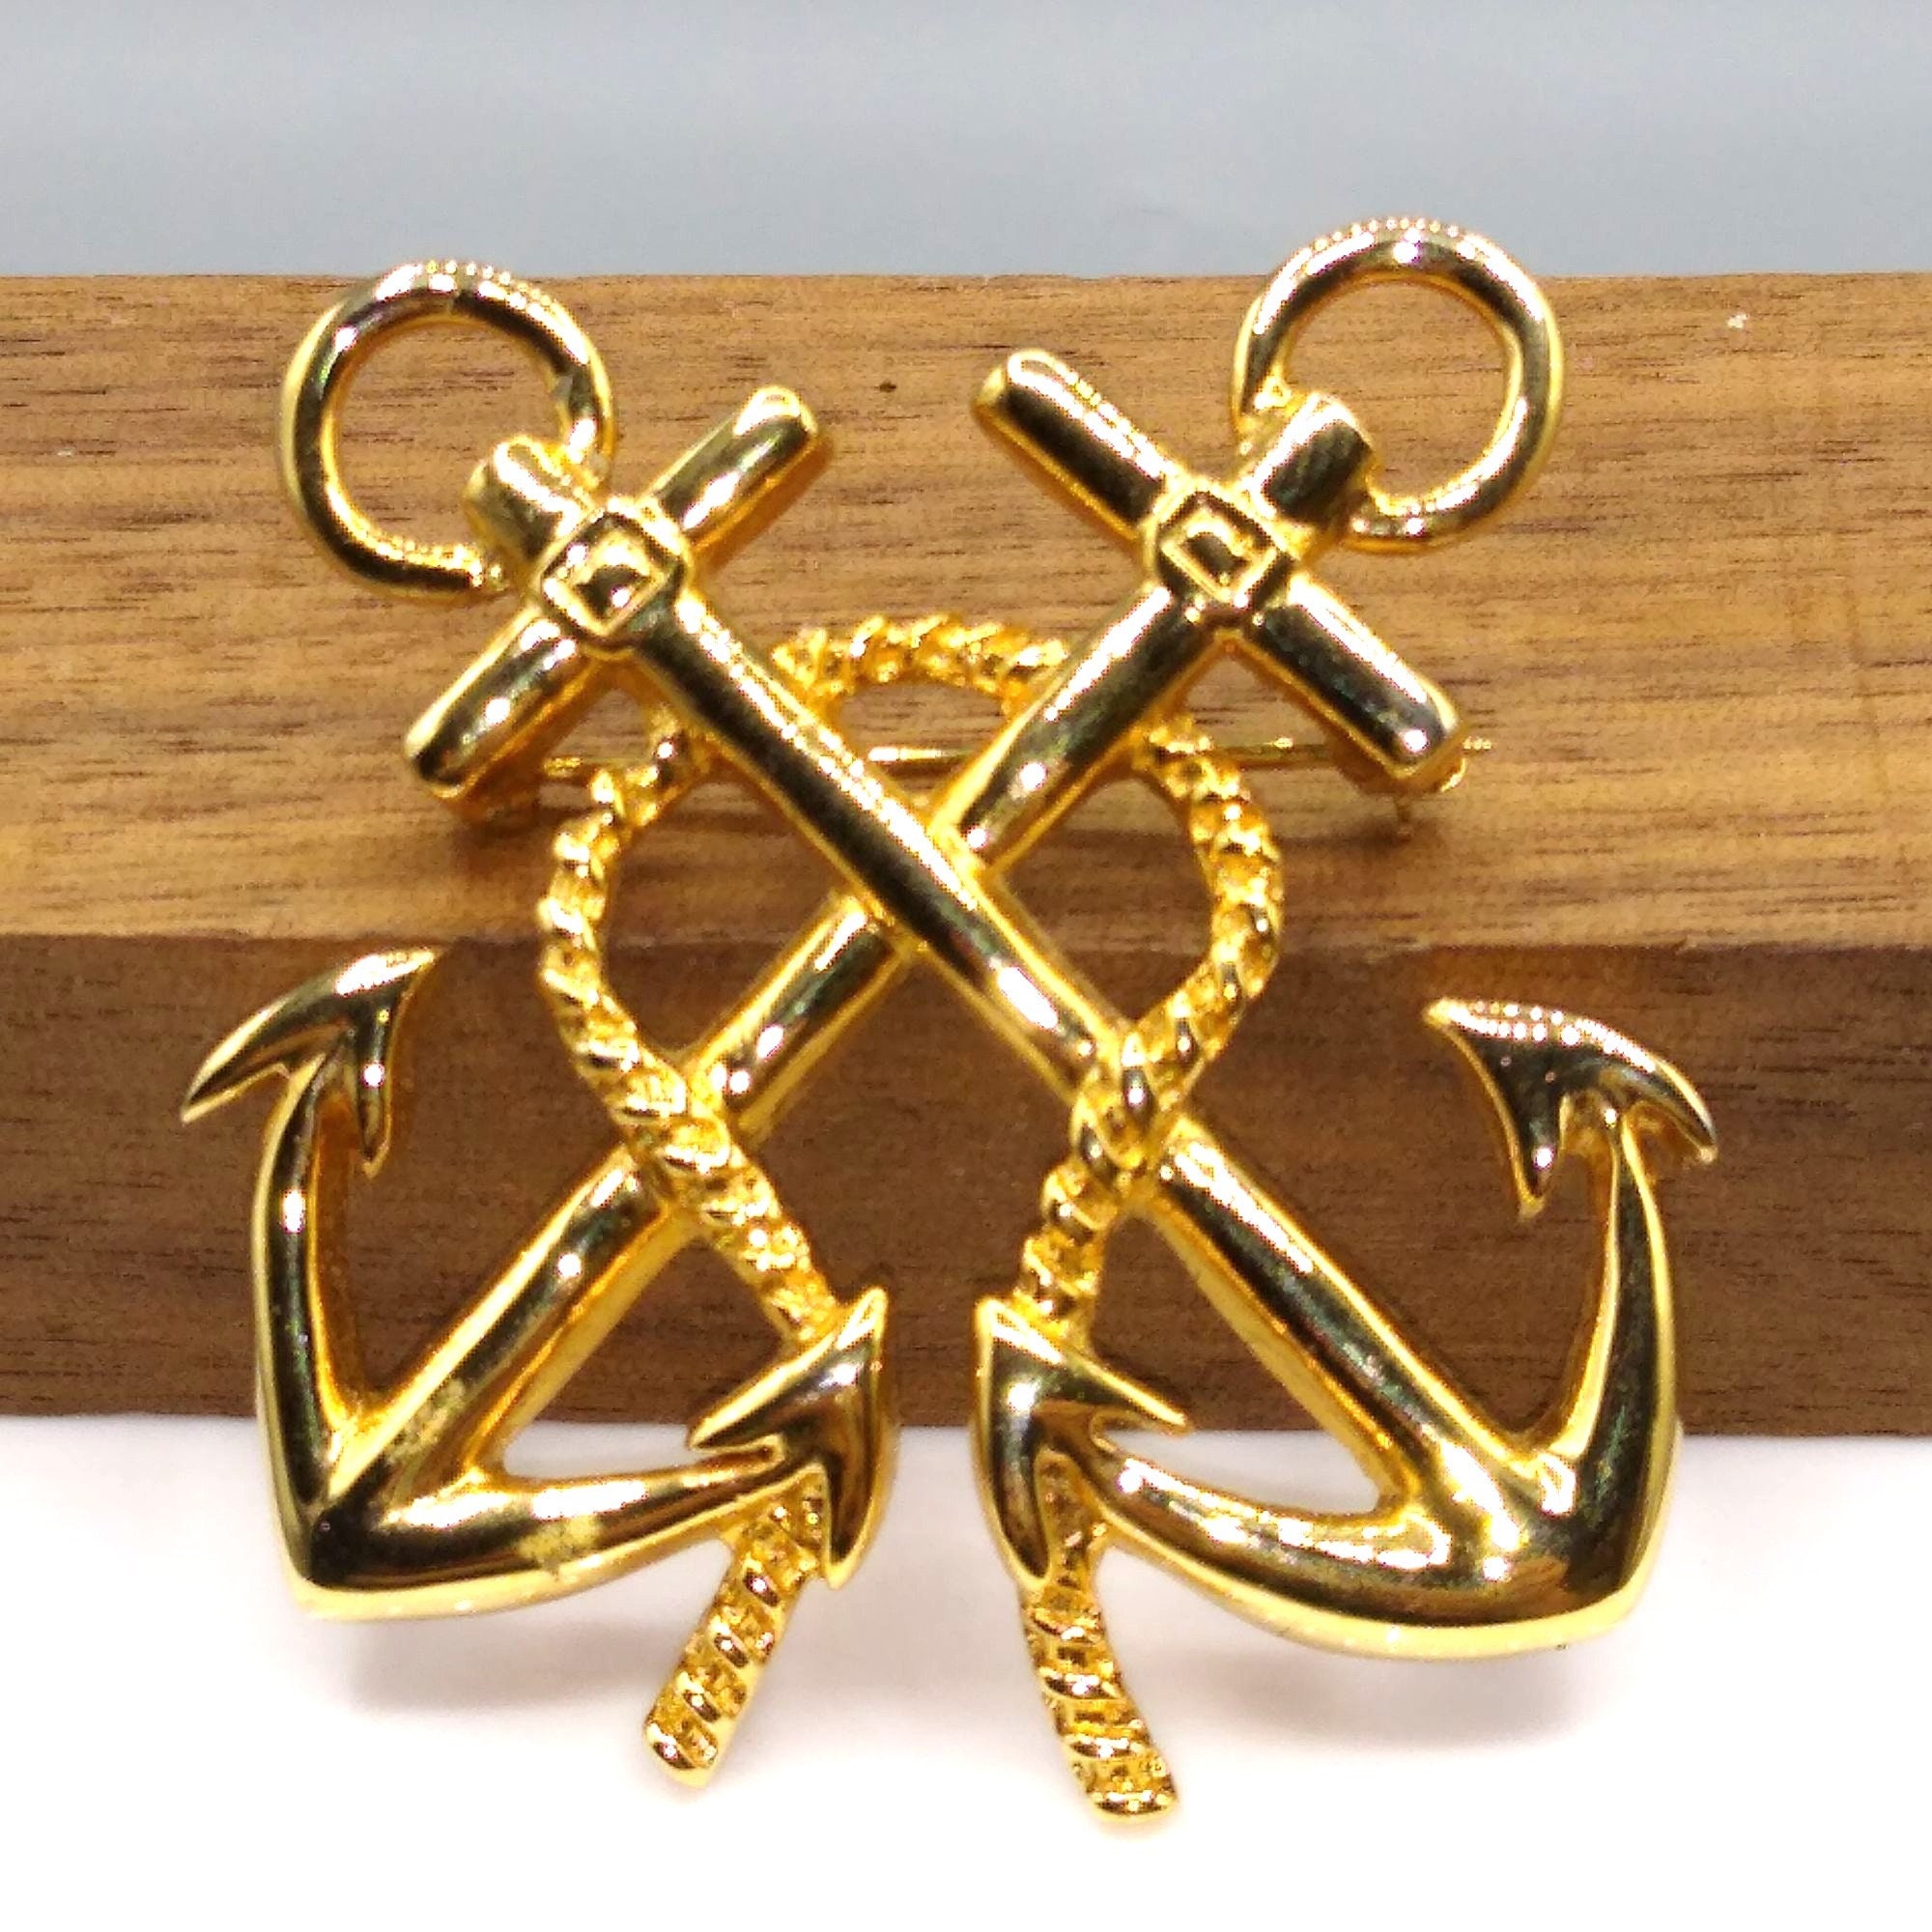 Nautical Brooch Related To Sailer Theme